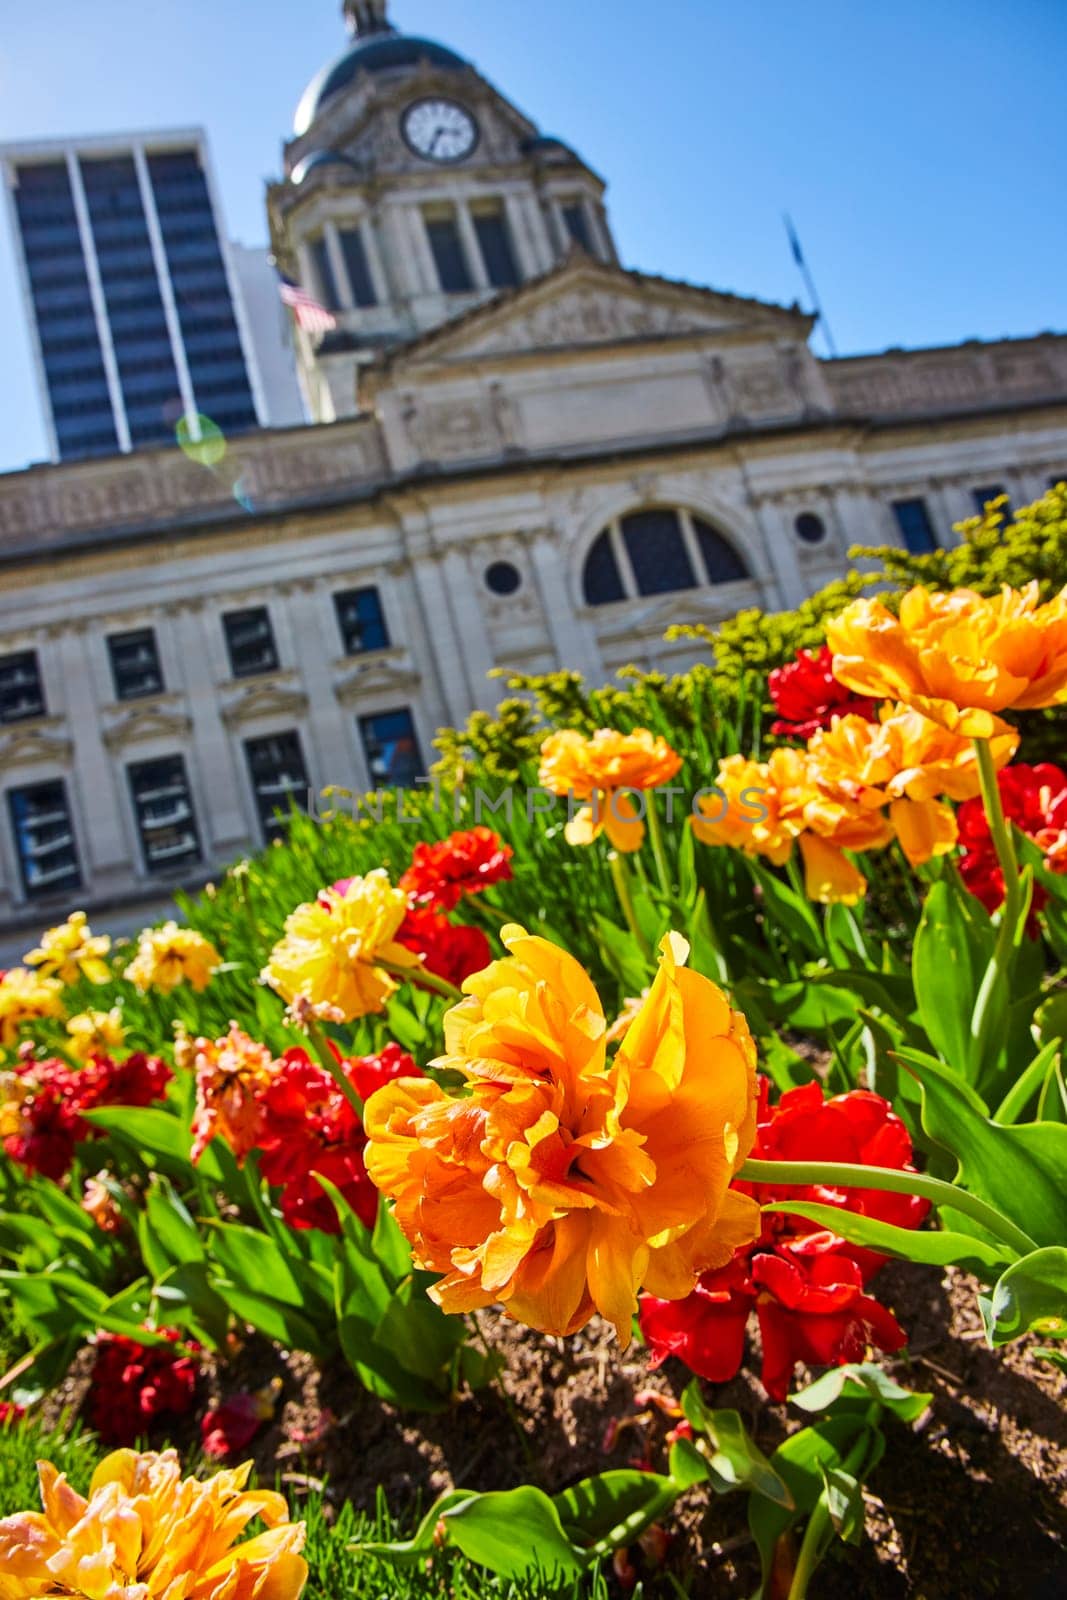 Vivid tulips bloom in front of Fort Wayne's historic courthouse under a clear blue sky, symbolizing community and renewal.